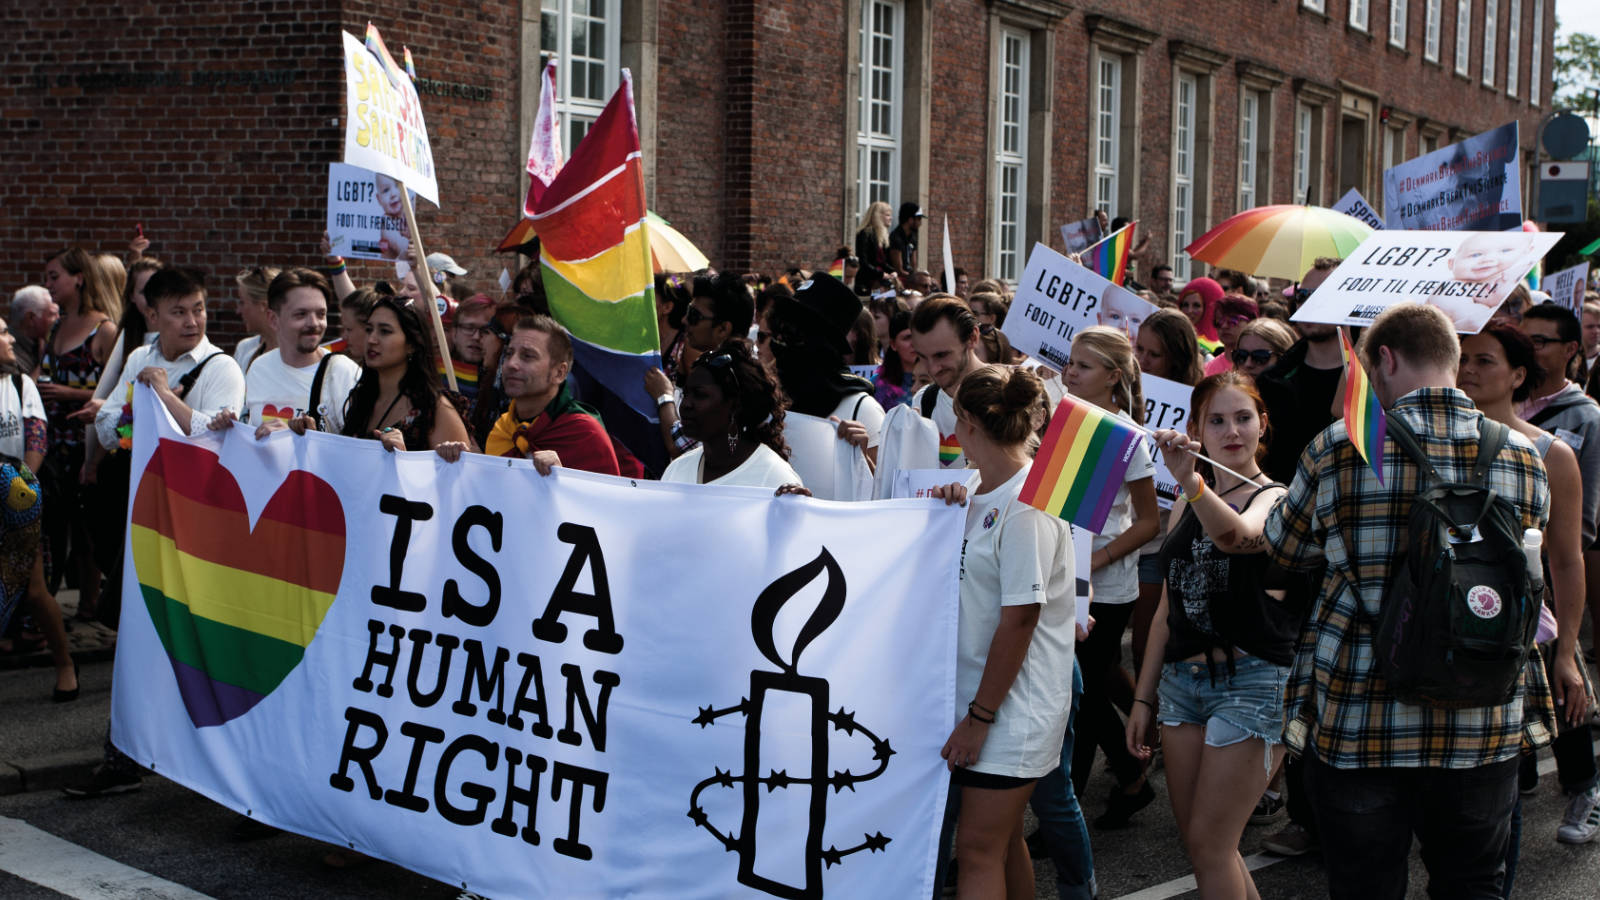 A culture of diversity and tolerance: Christopher Street Day (CSD) in Copenhagen